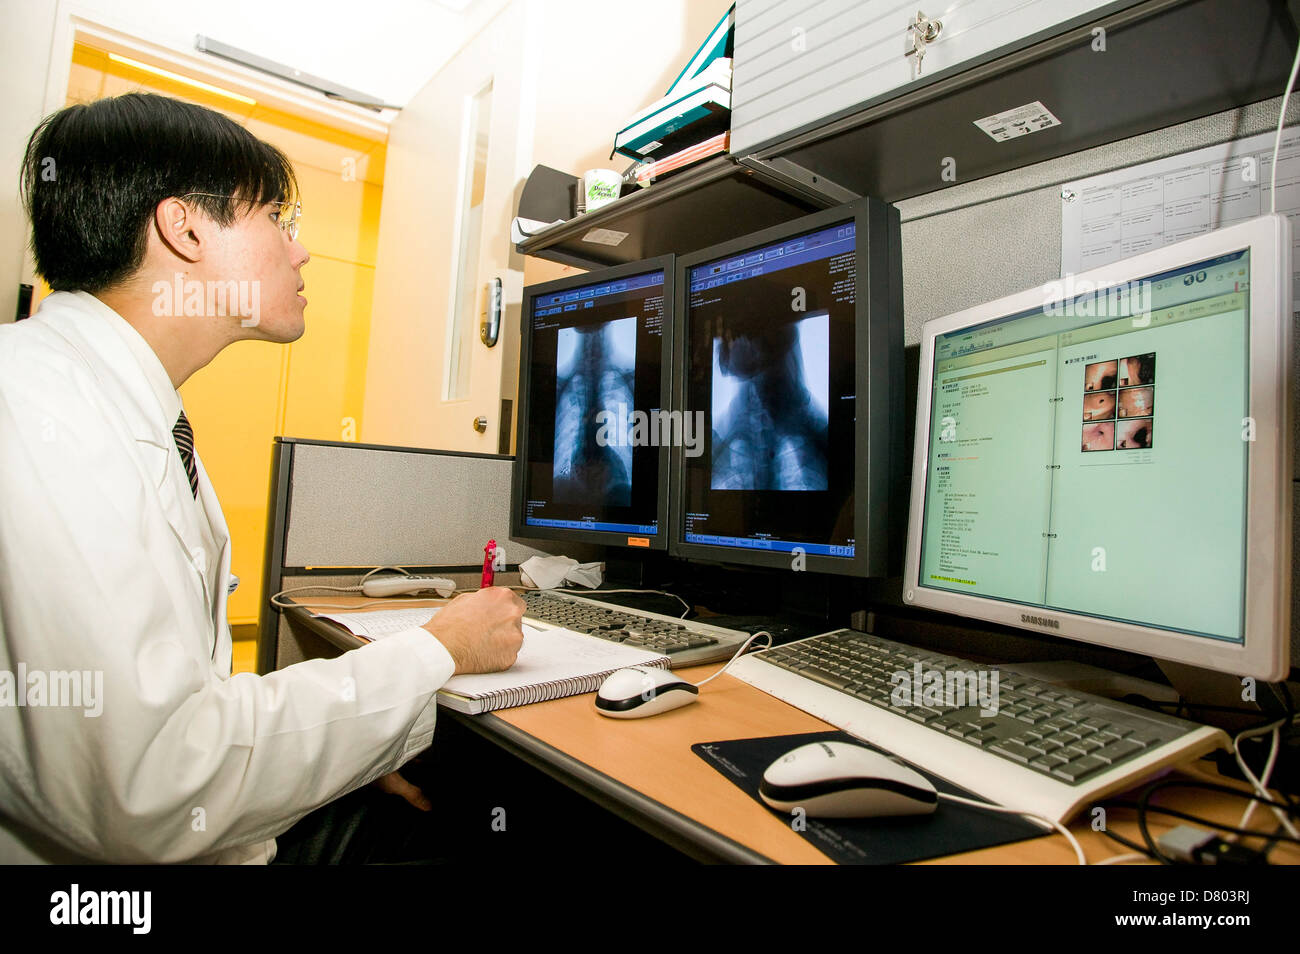 A doctor views x-ray images, as part of patient diagnosis, in the Reading Room, in a Medical Centre. Stock Photo